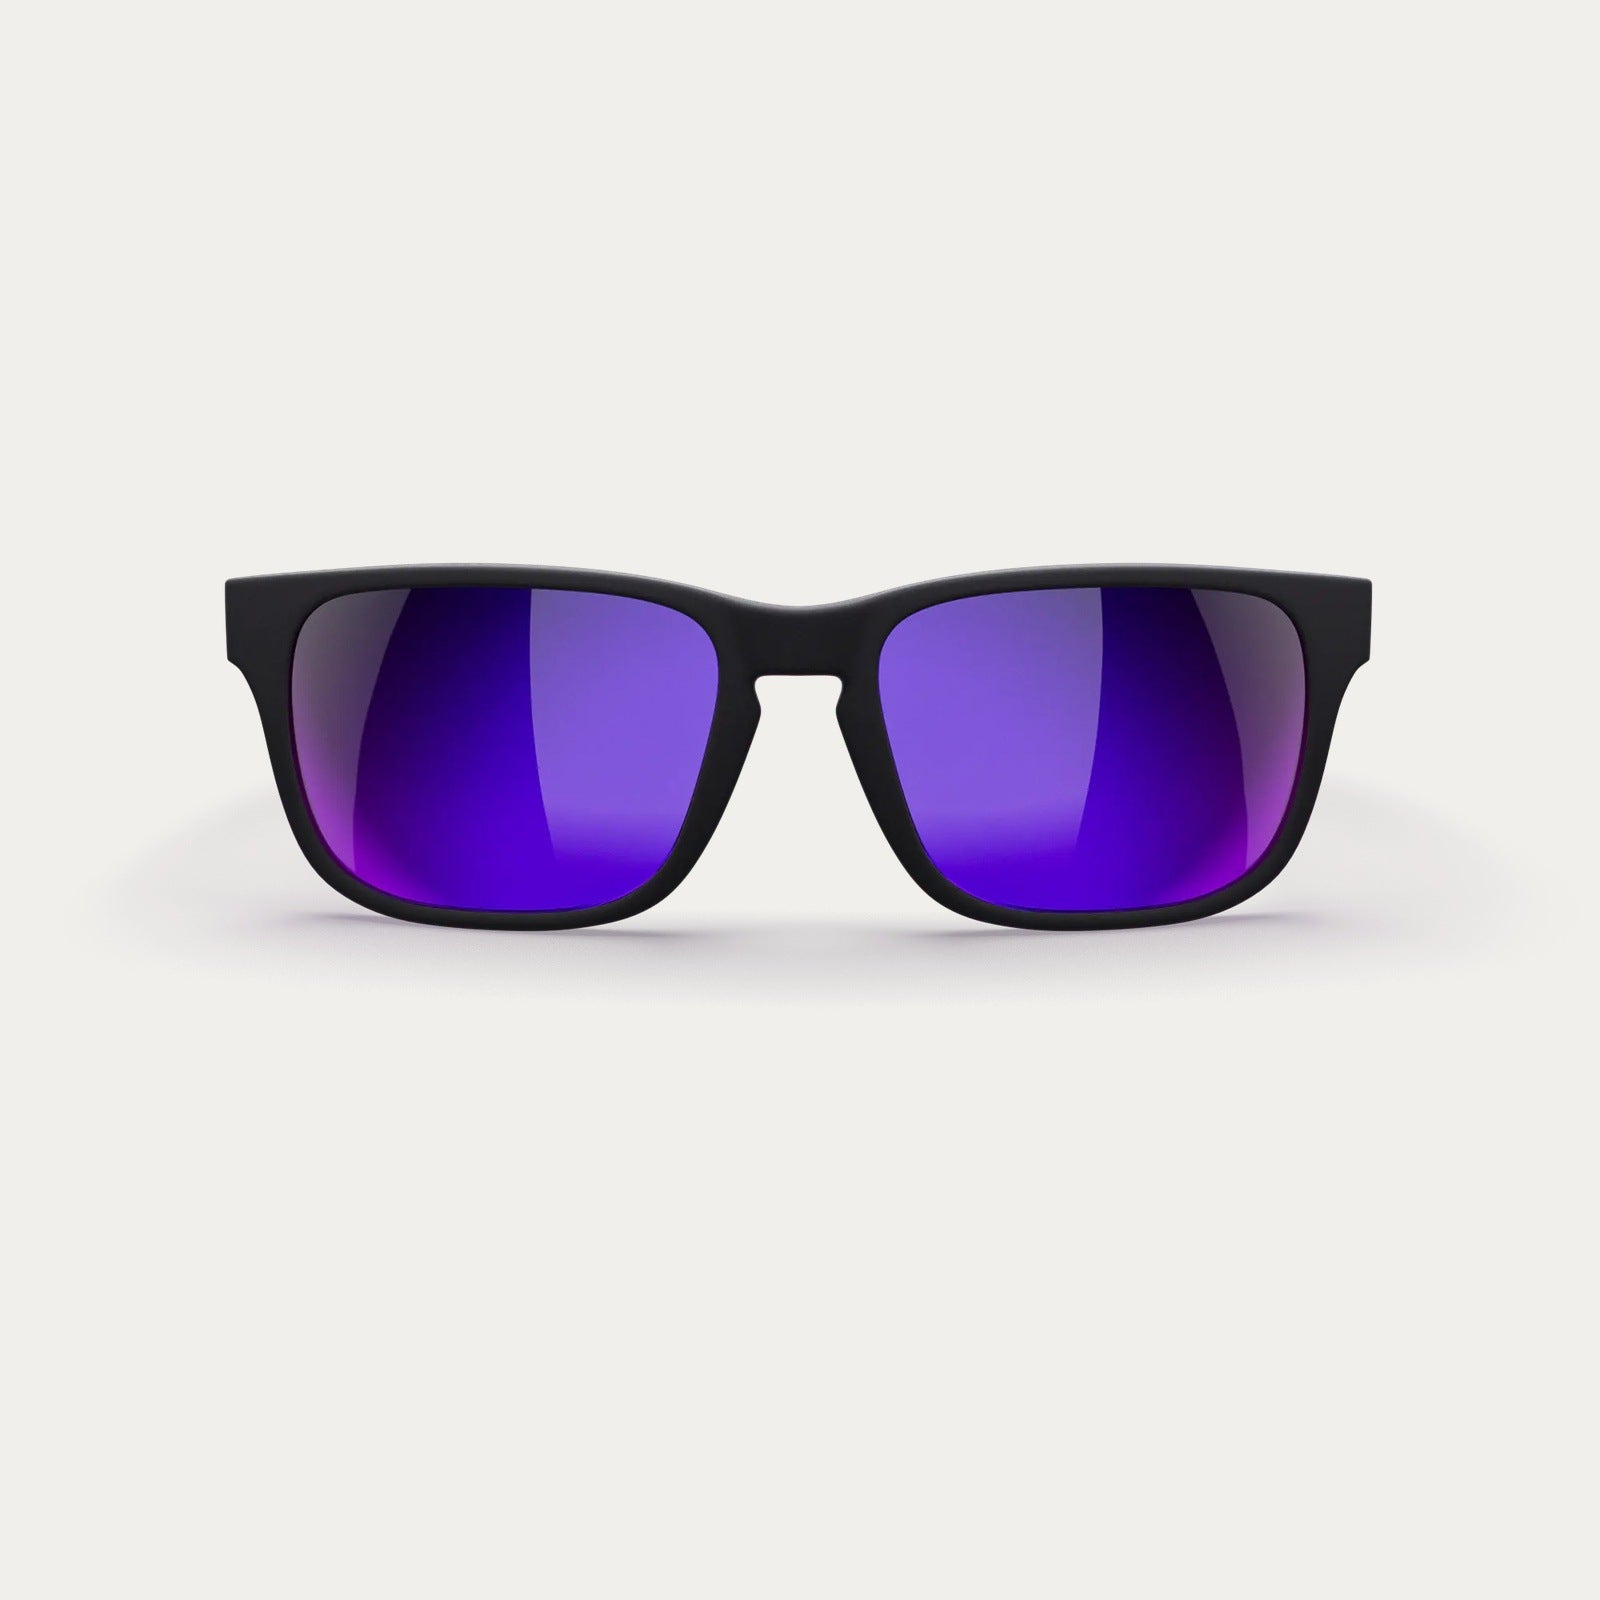 Brighten Up Your World with Blue Lens Sport Sunglasses - Shatterproof